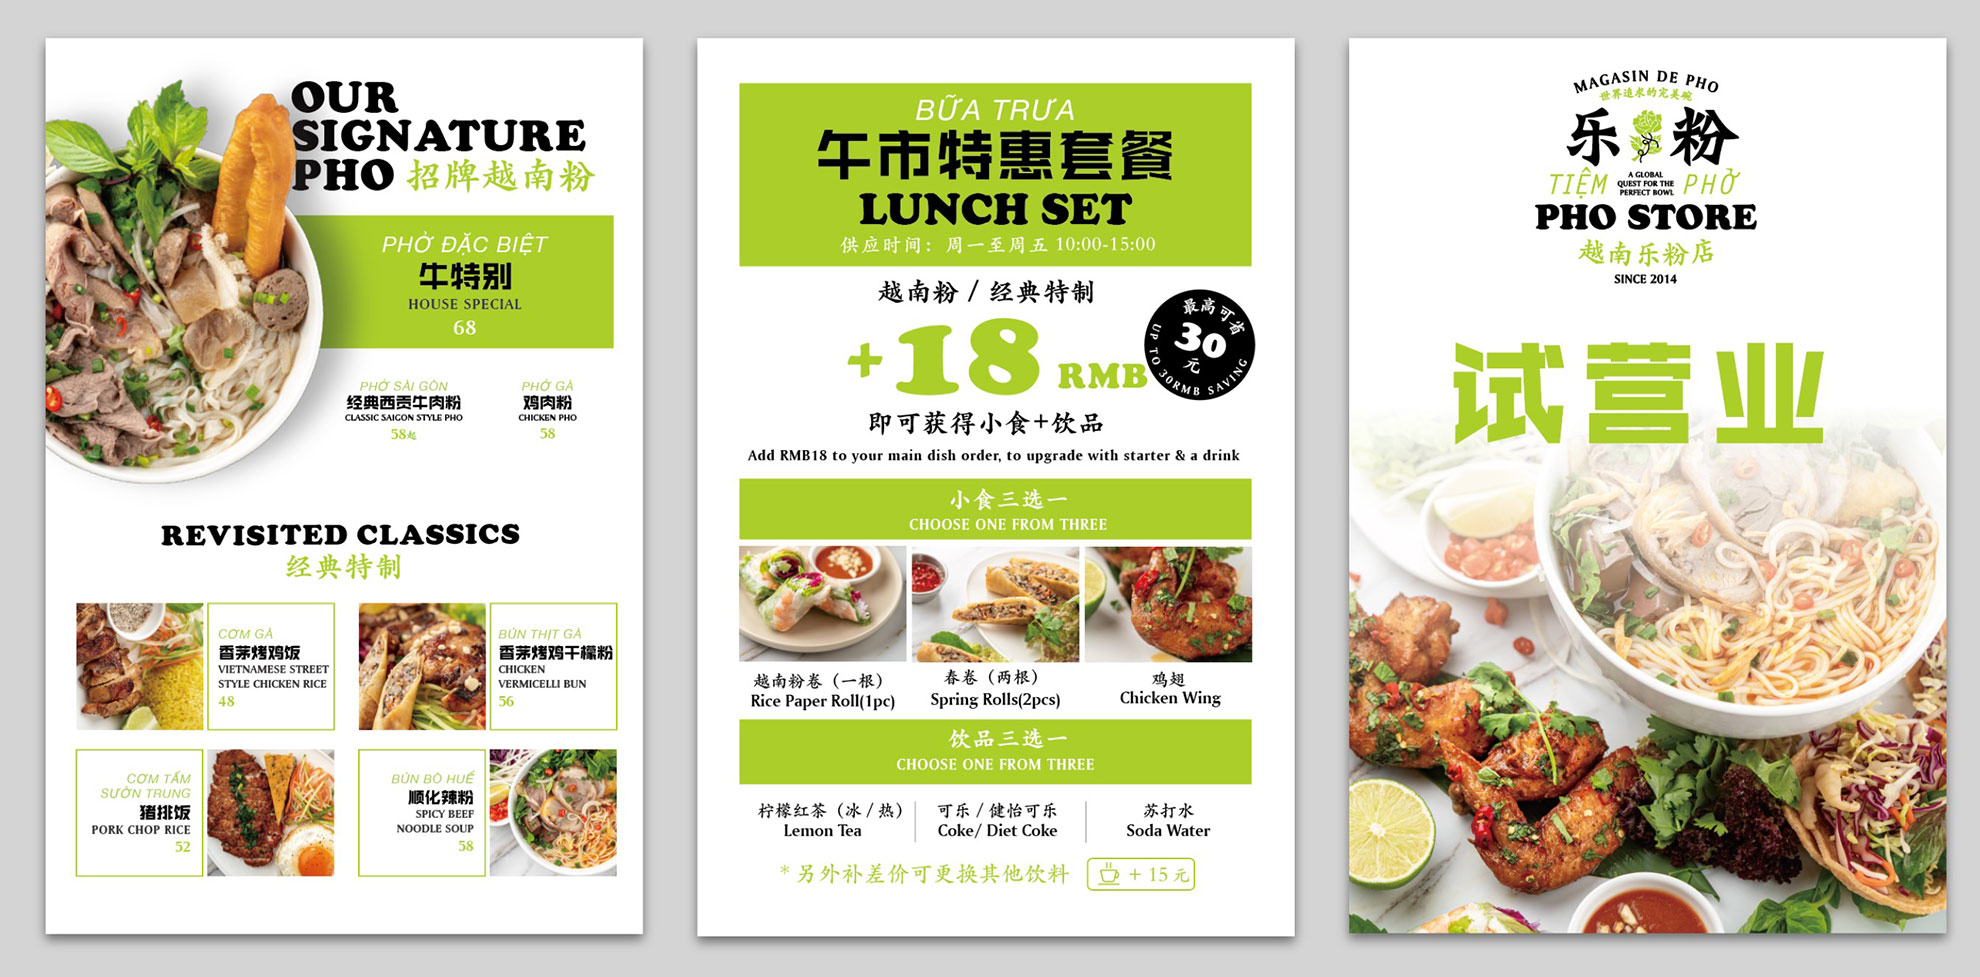 Pho Store All Lunchsets